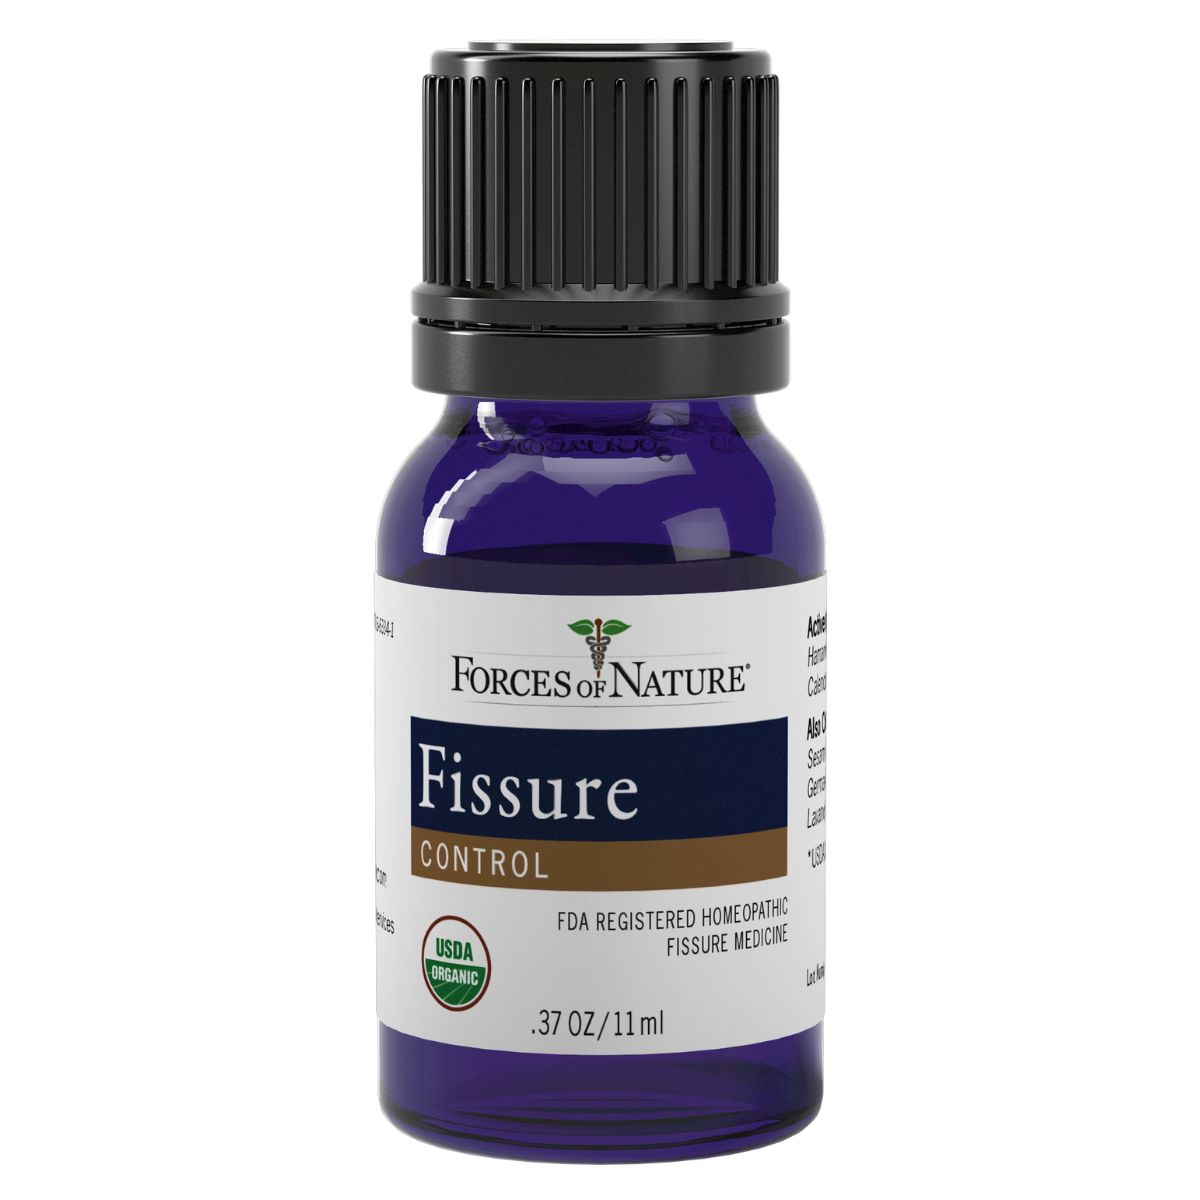 Forces of Nature - Fissure Control - 11 ml. - image 2 of 5